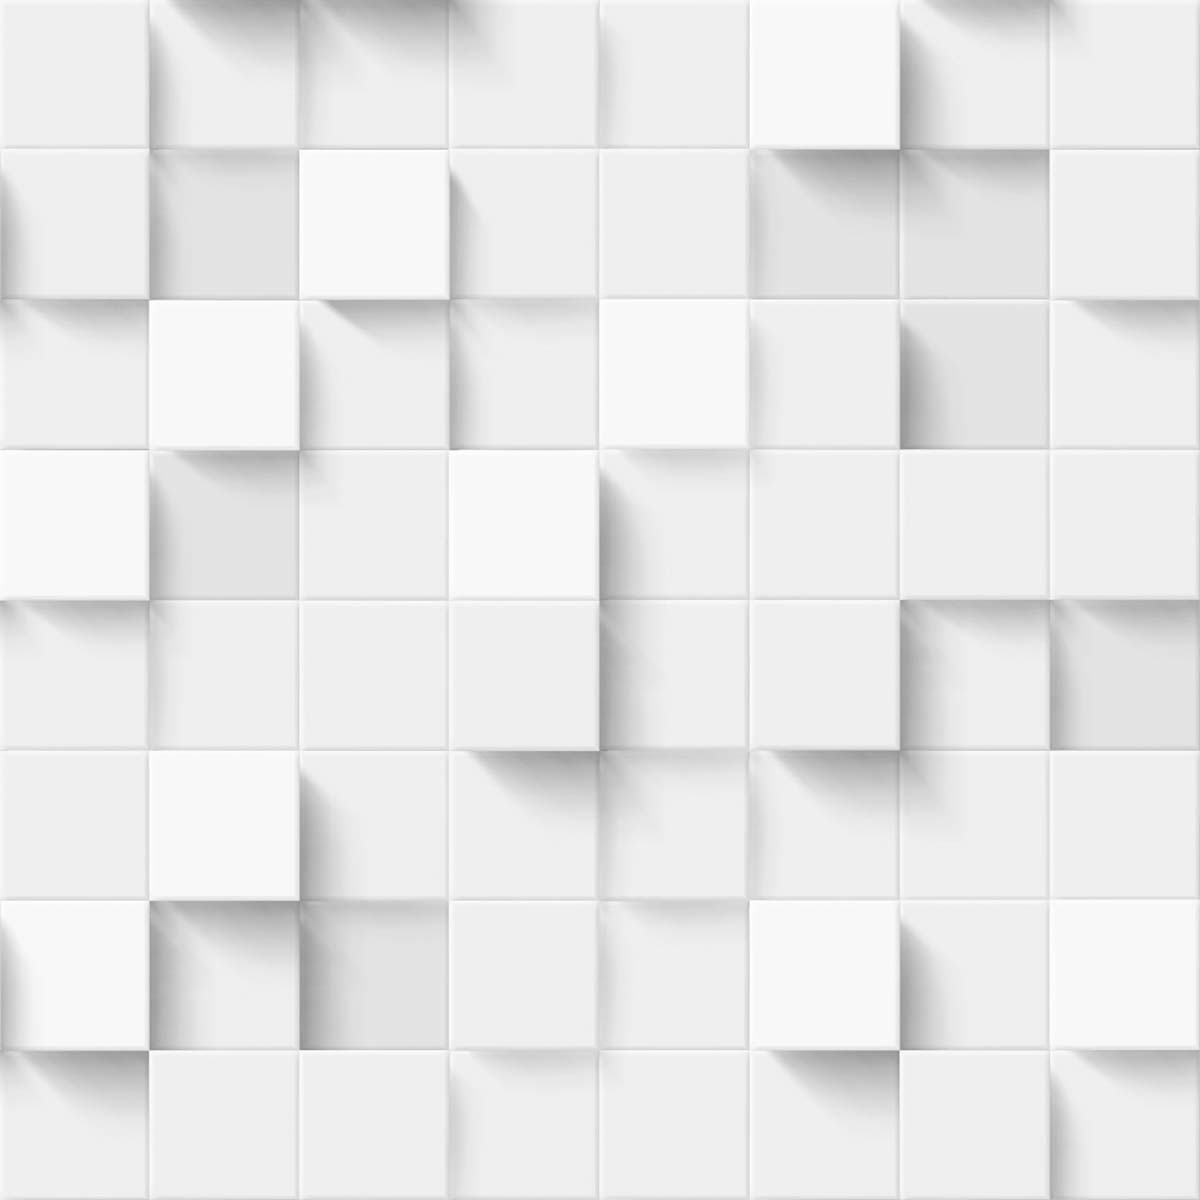 A white square tiles with shadows